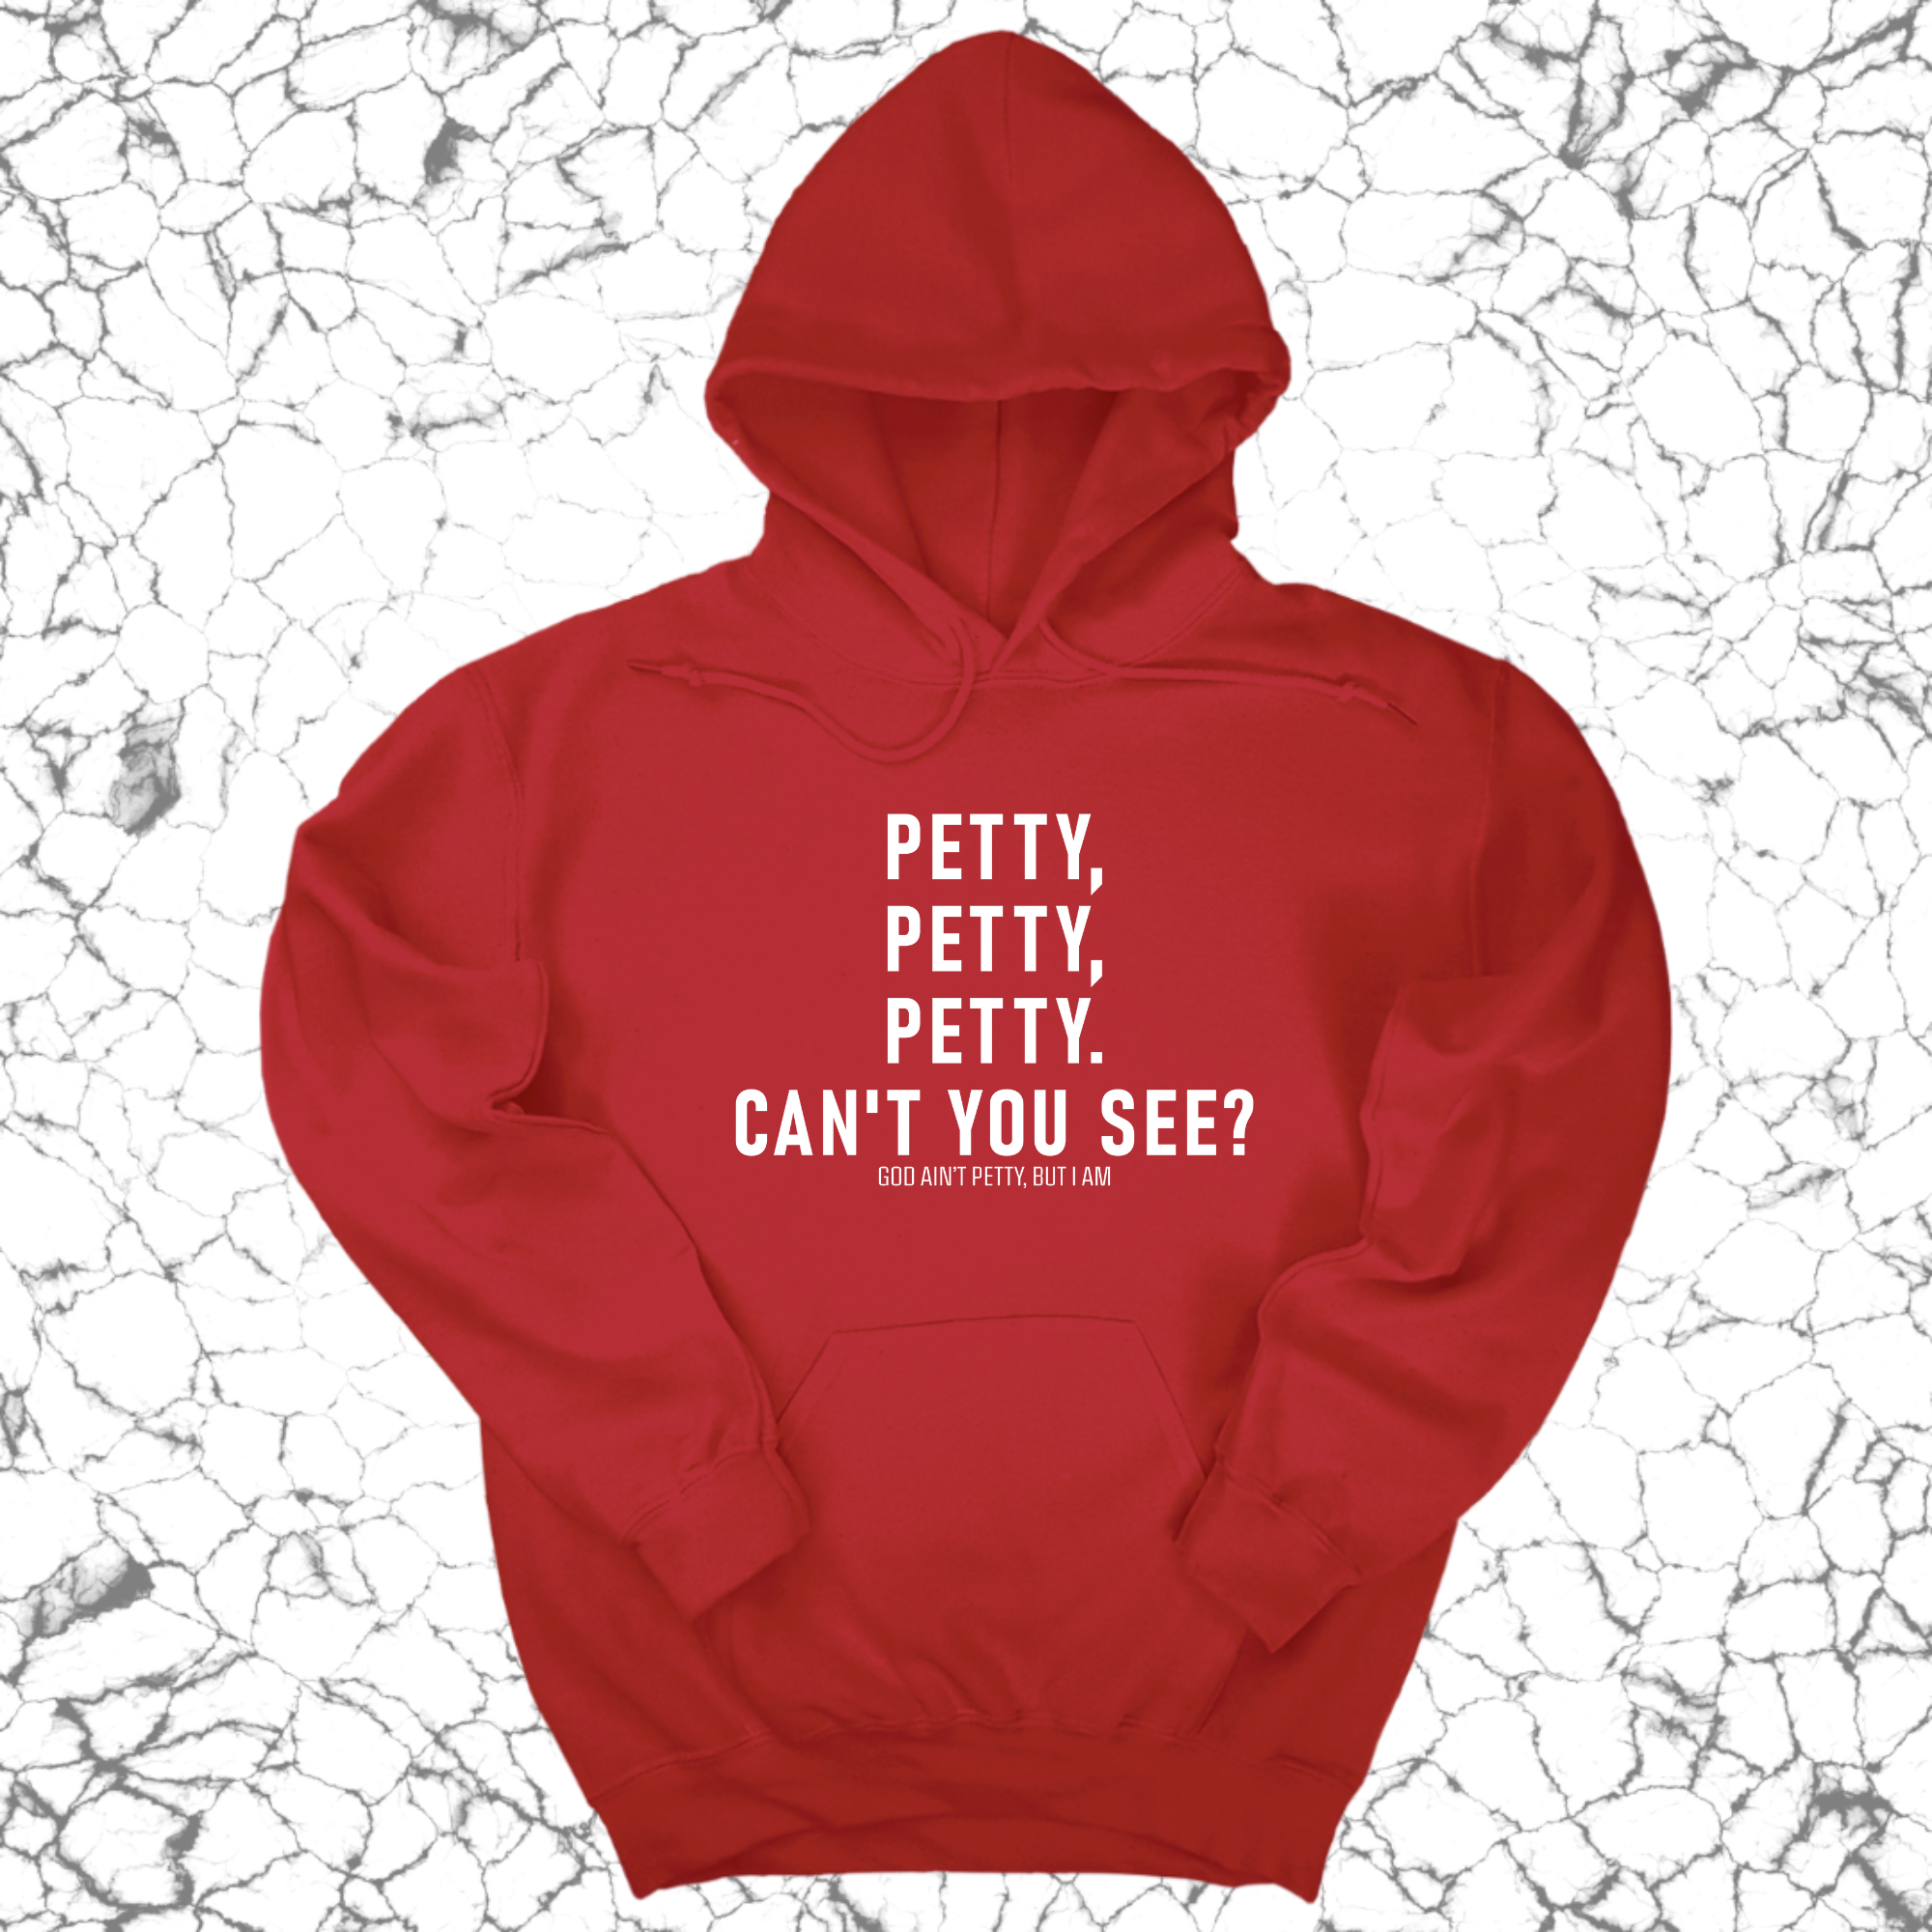 Petty, Petty, Petty. Can't you see Unisex Hoodie-Hoodie-The Original God Ain't Petty But I Am